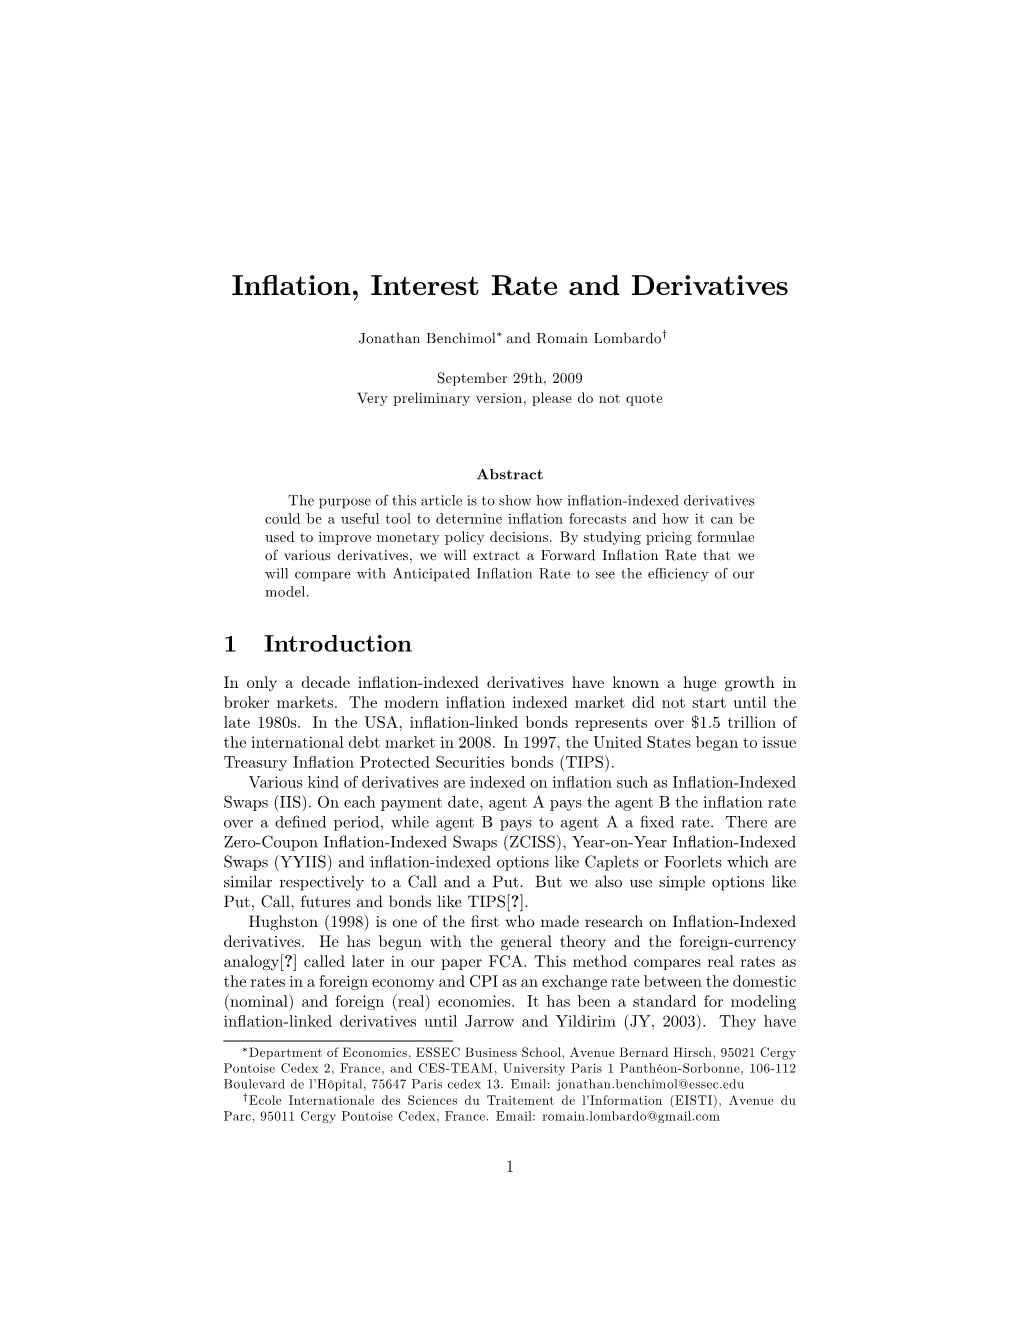 Inflation, Interest Rate and Derivatives